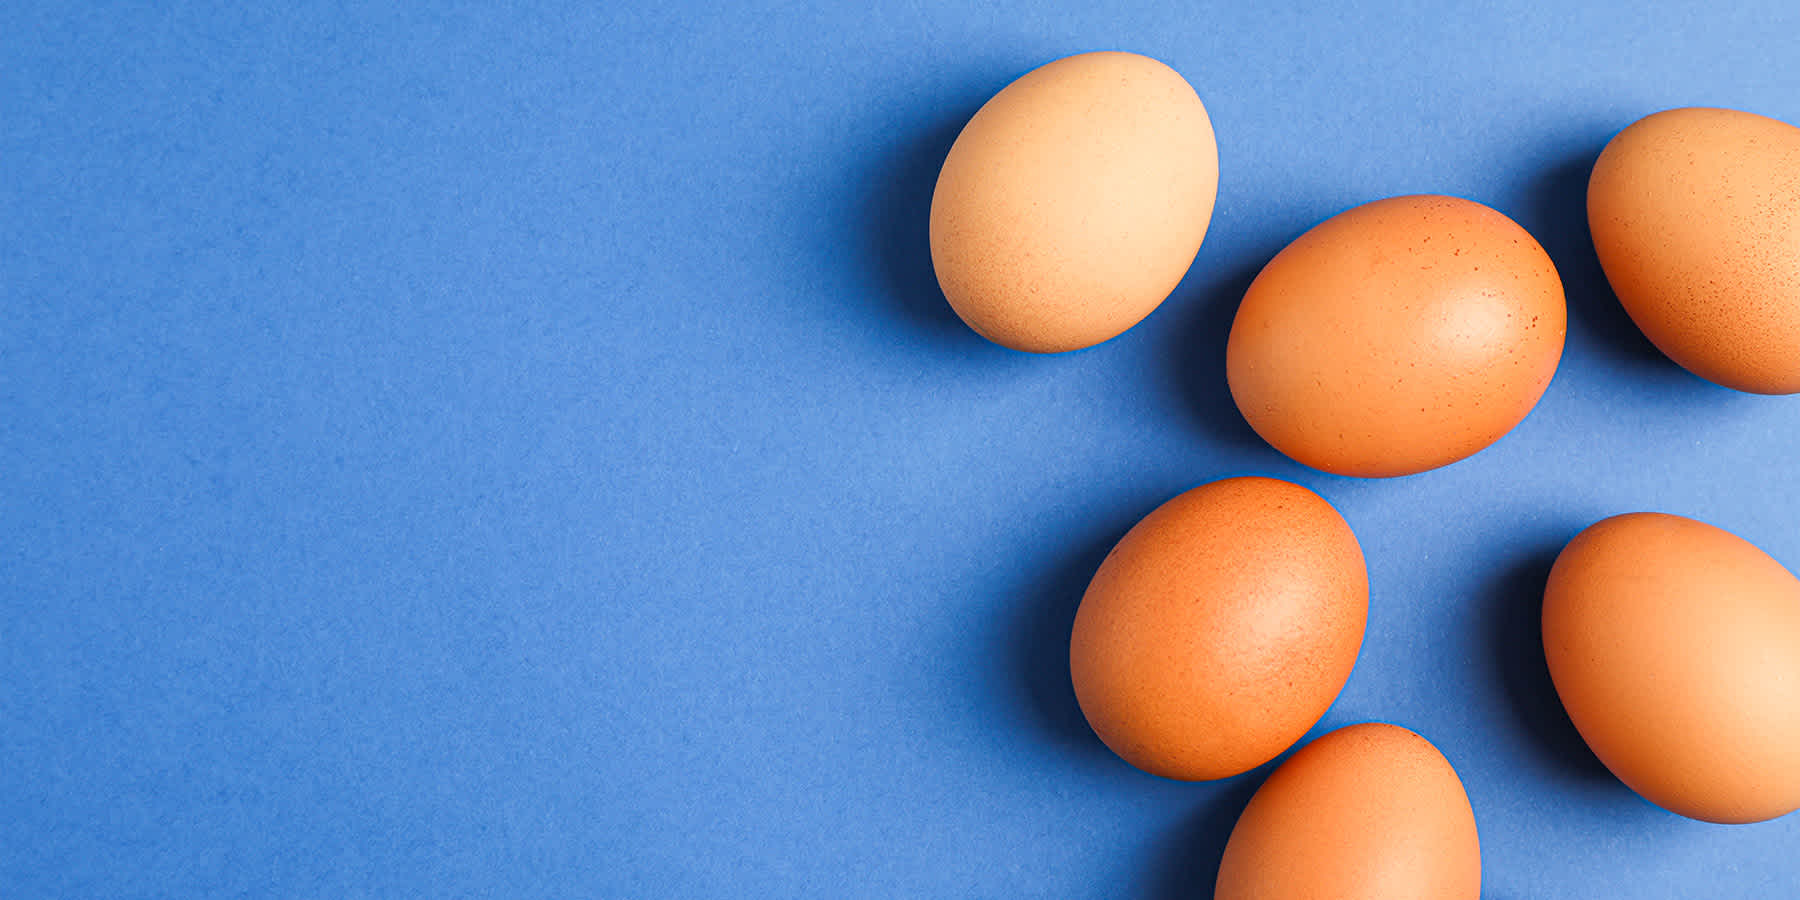 Eggs with high vitamin B12 content against a blue background